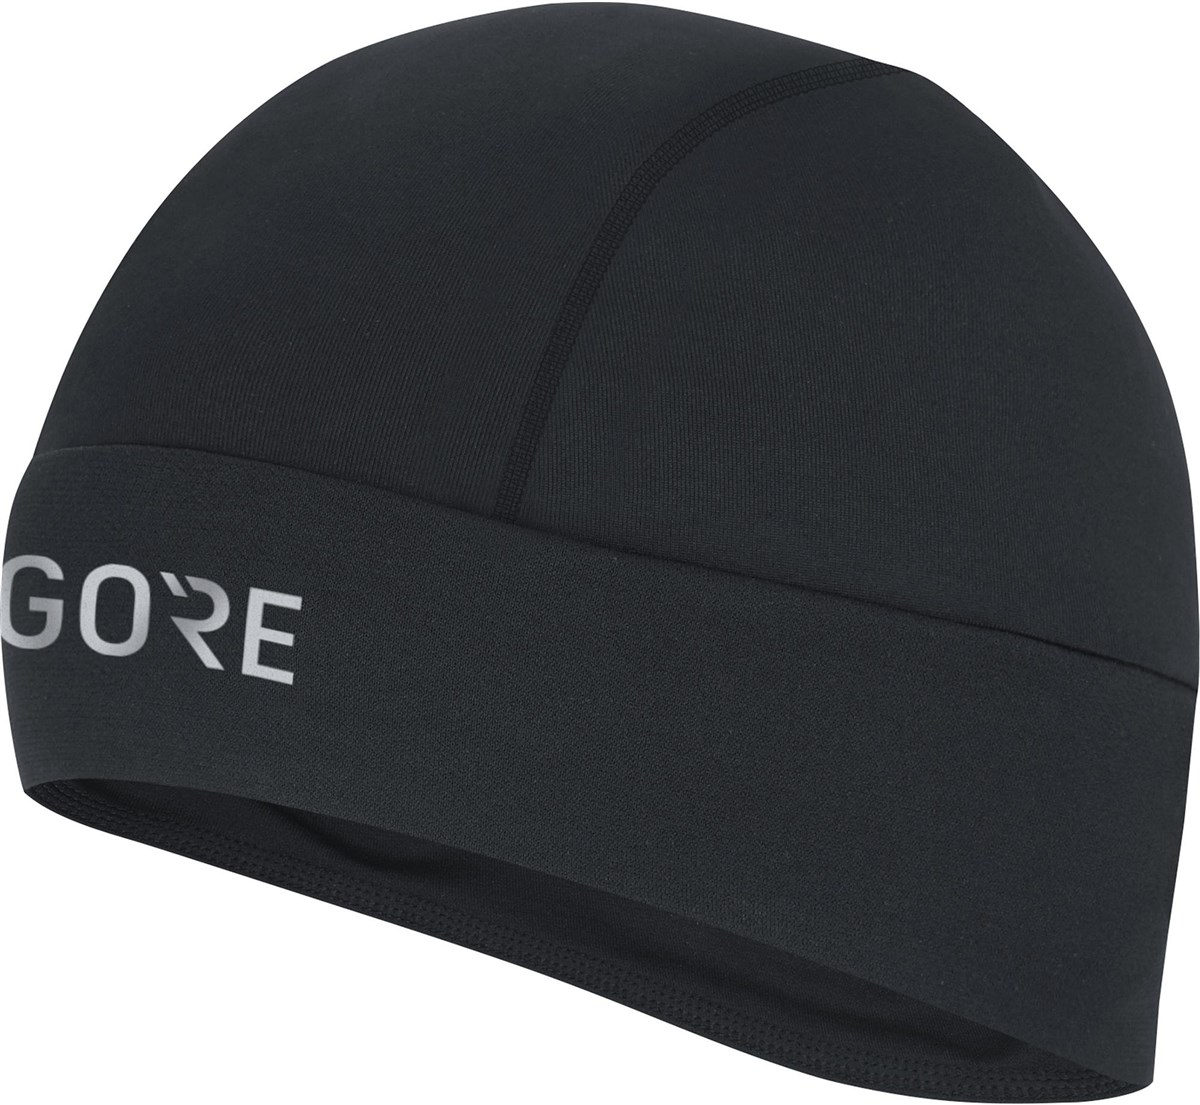 Gore M Light Beanie product image